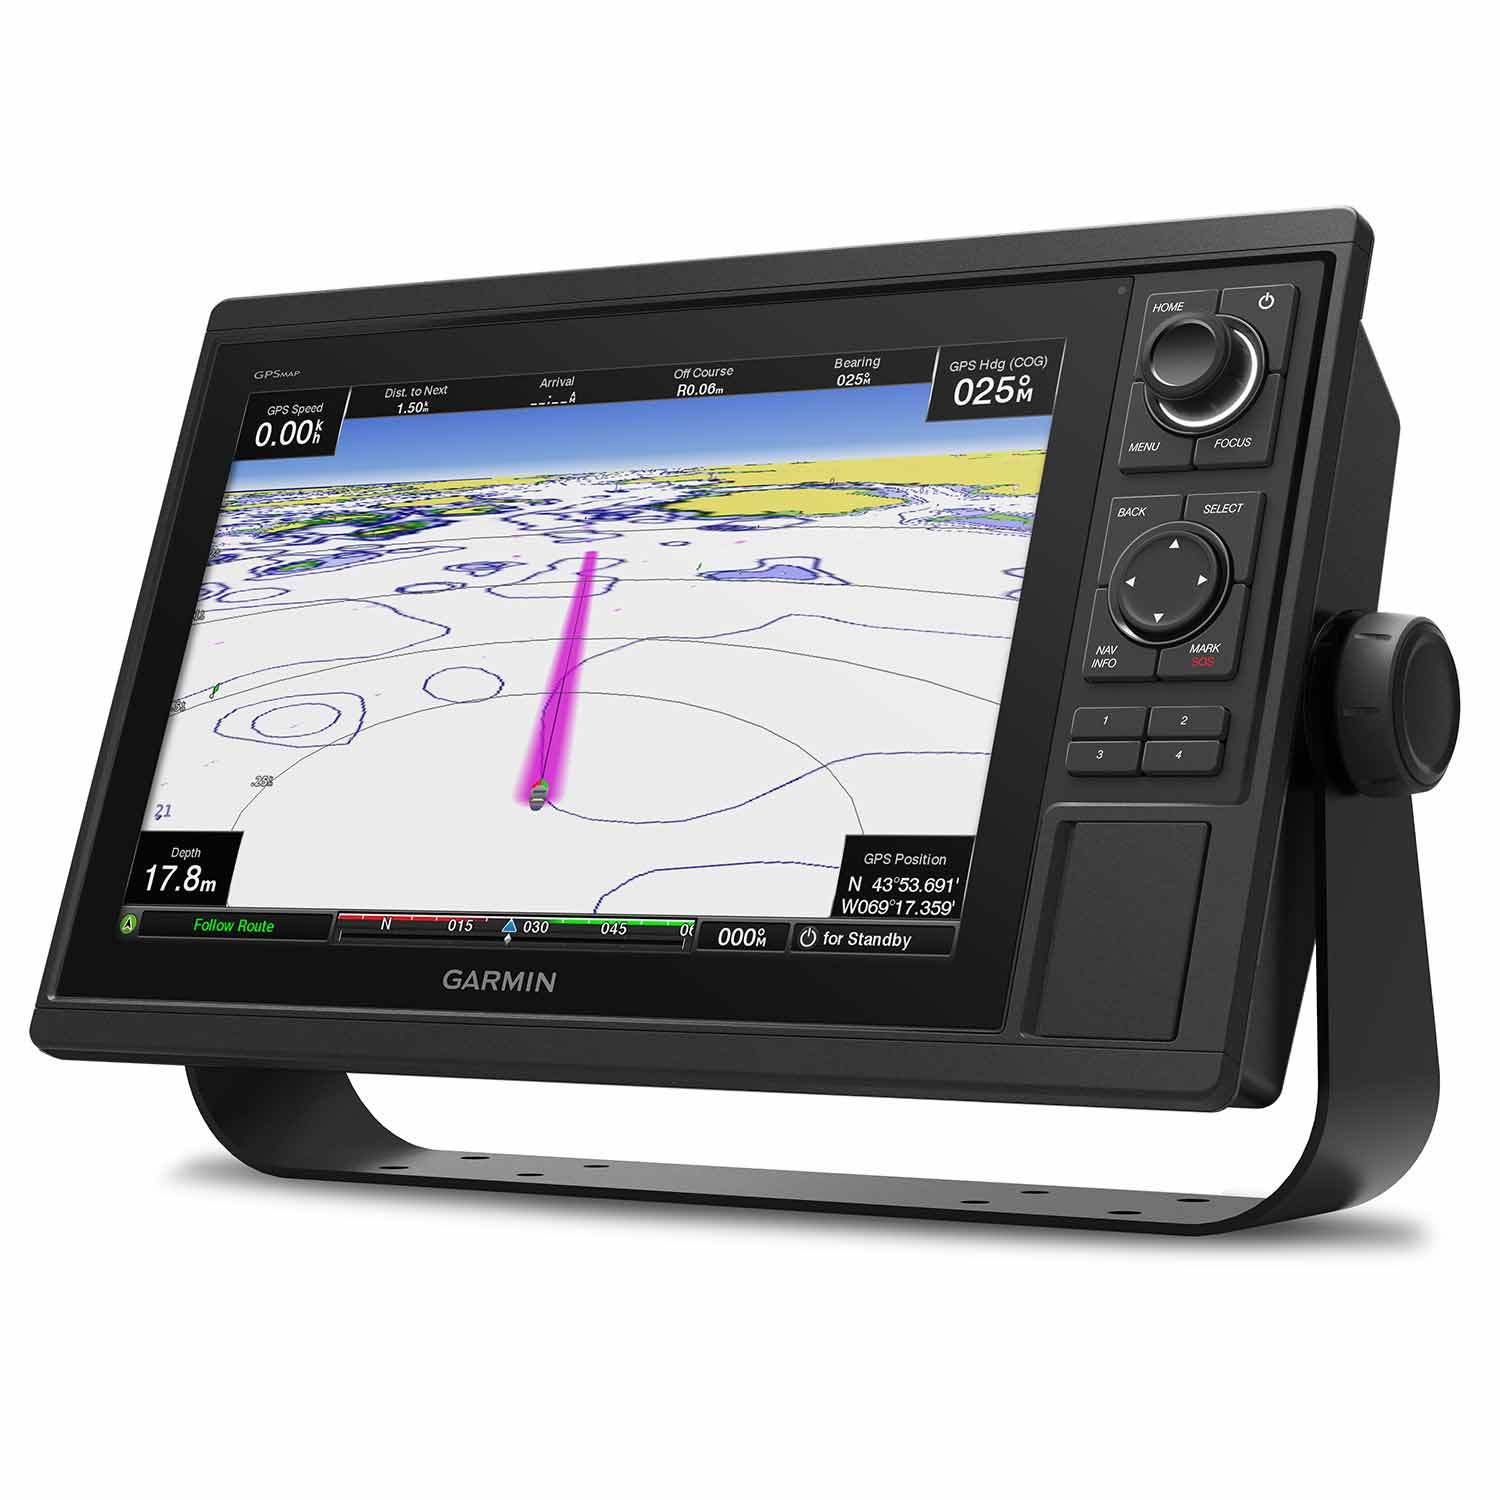 1222 12" Chartplotter and Multifunction Display with World Wide Basemap Charts | Marine